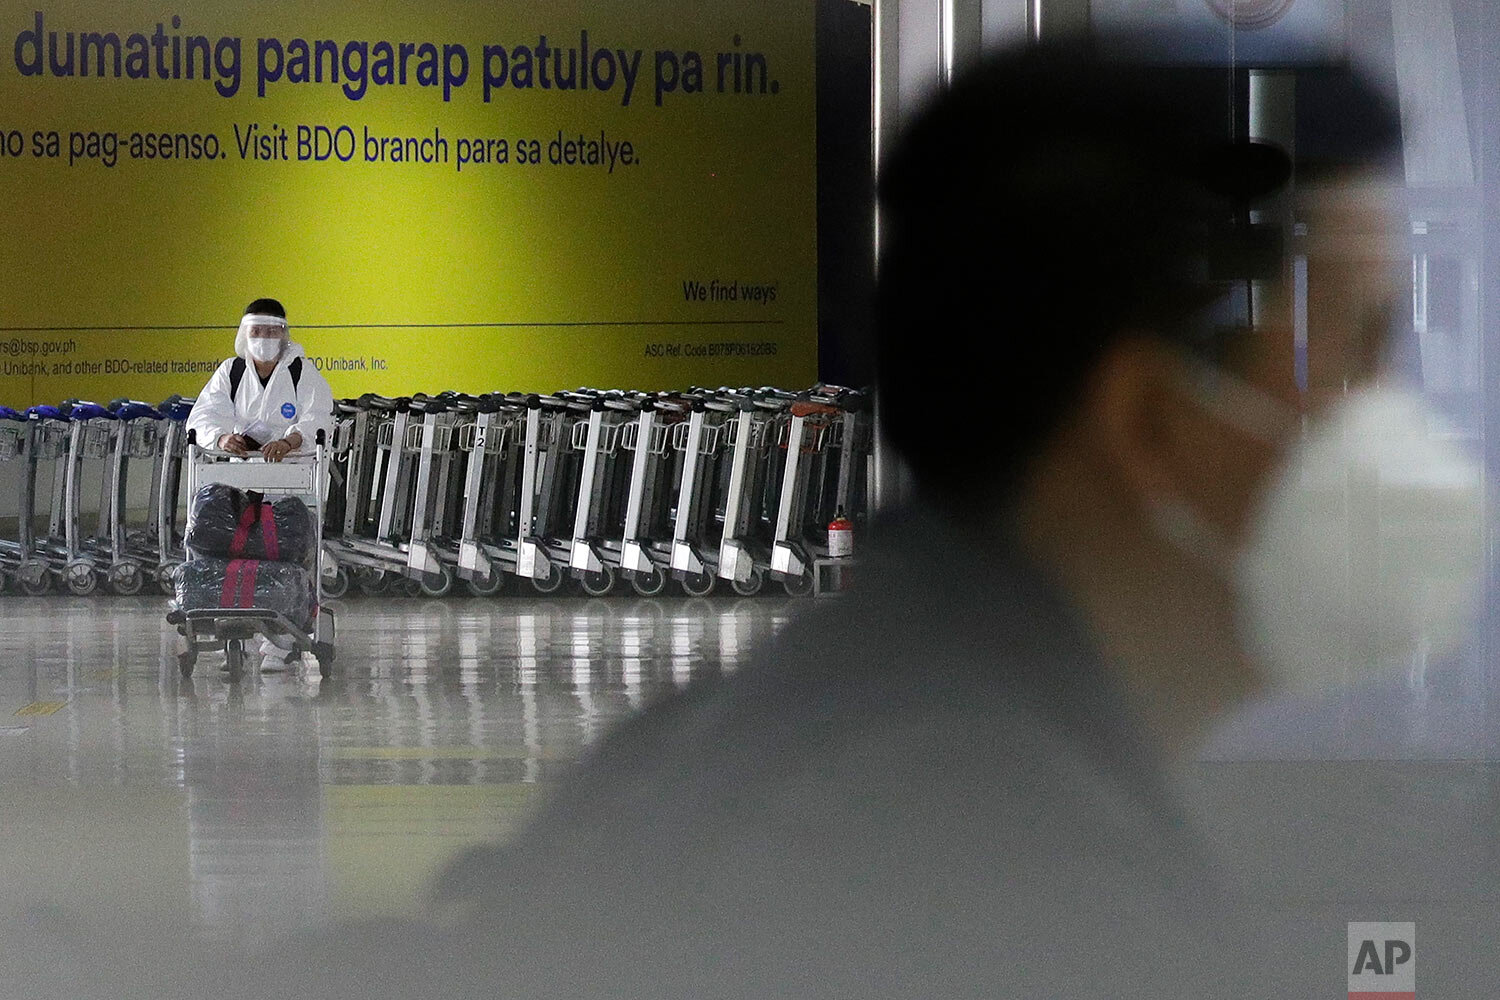  A woman wearing a protective suit pushes a cart at the arrival area of Manila's International Airport, Philippines on Wednesday, March 17, 2021.  (AP Photo/Aaron Favila) 